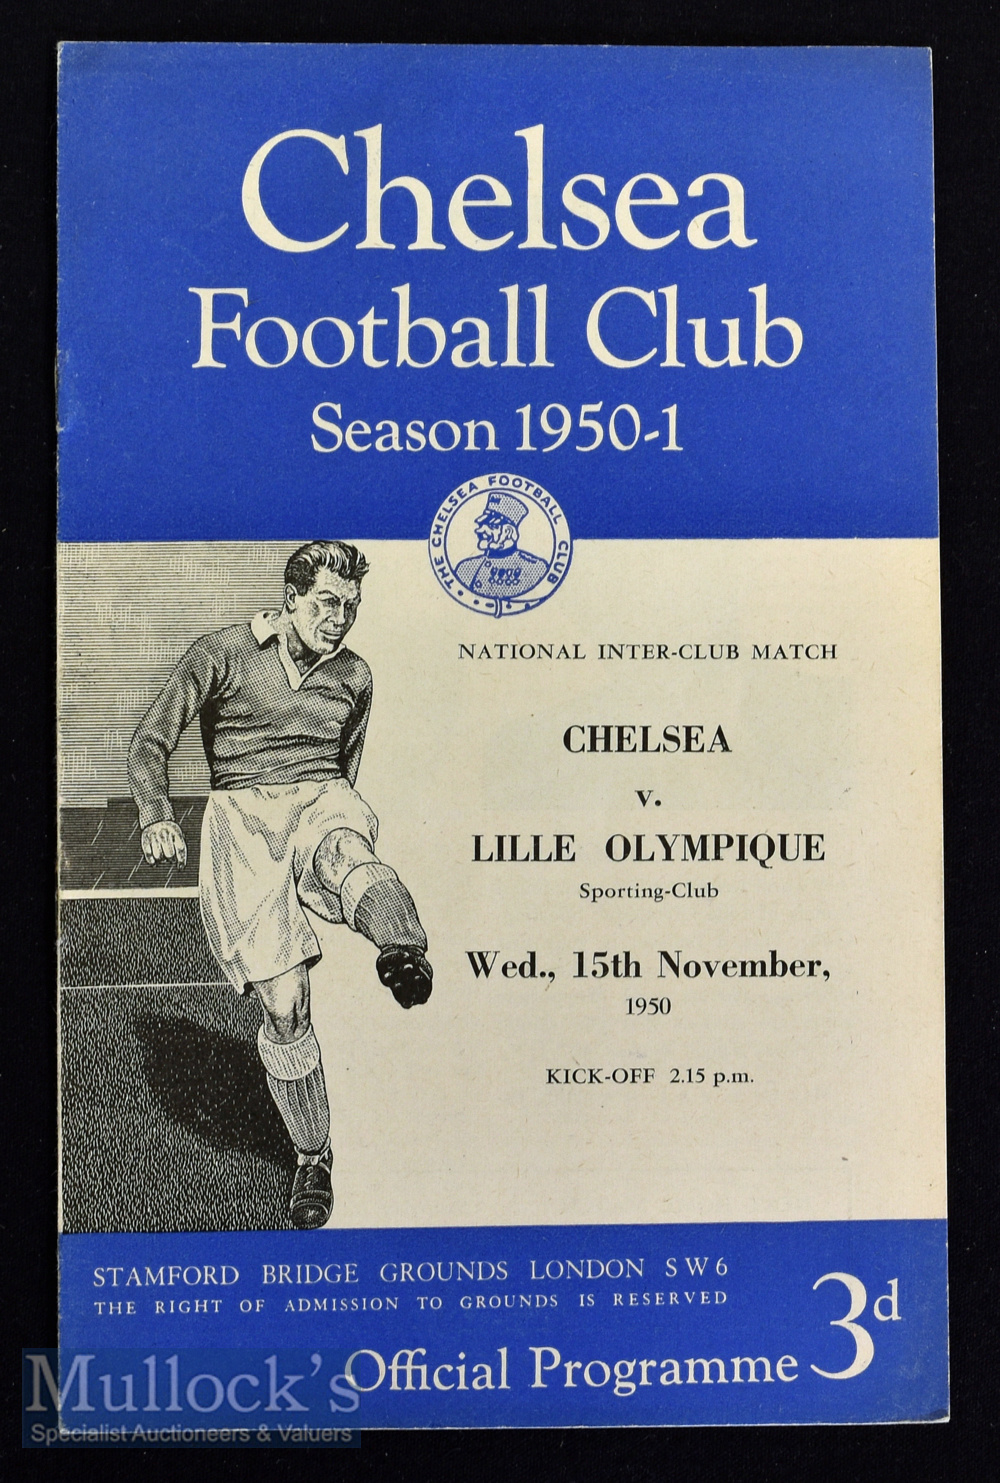 Scarce 1950/51 Chelsea v Lille Olympique football programme Inter-Club match date 15 Nov at Stamford